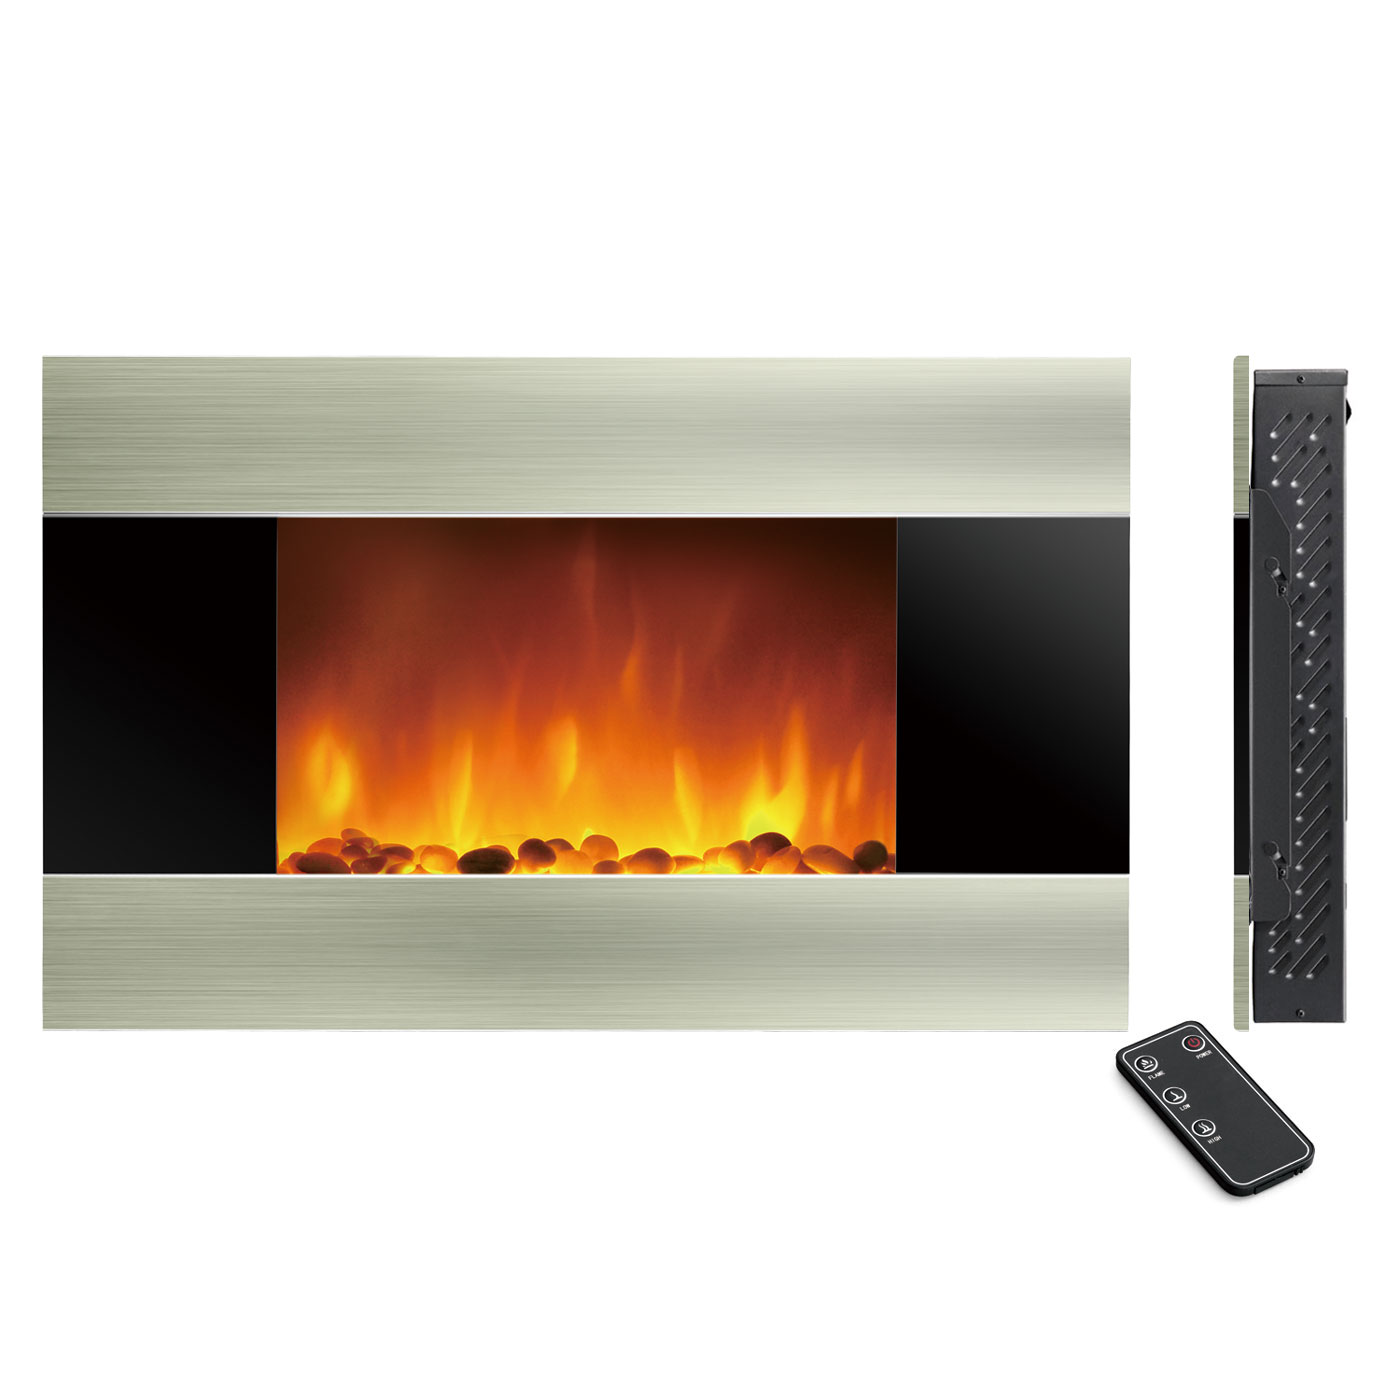 Stainless steel Electrical Fireplace